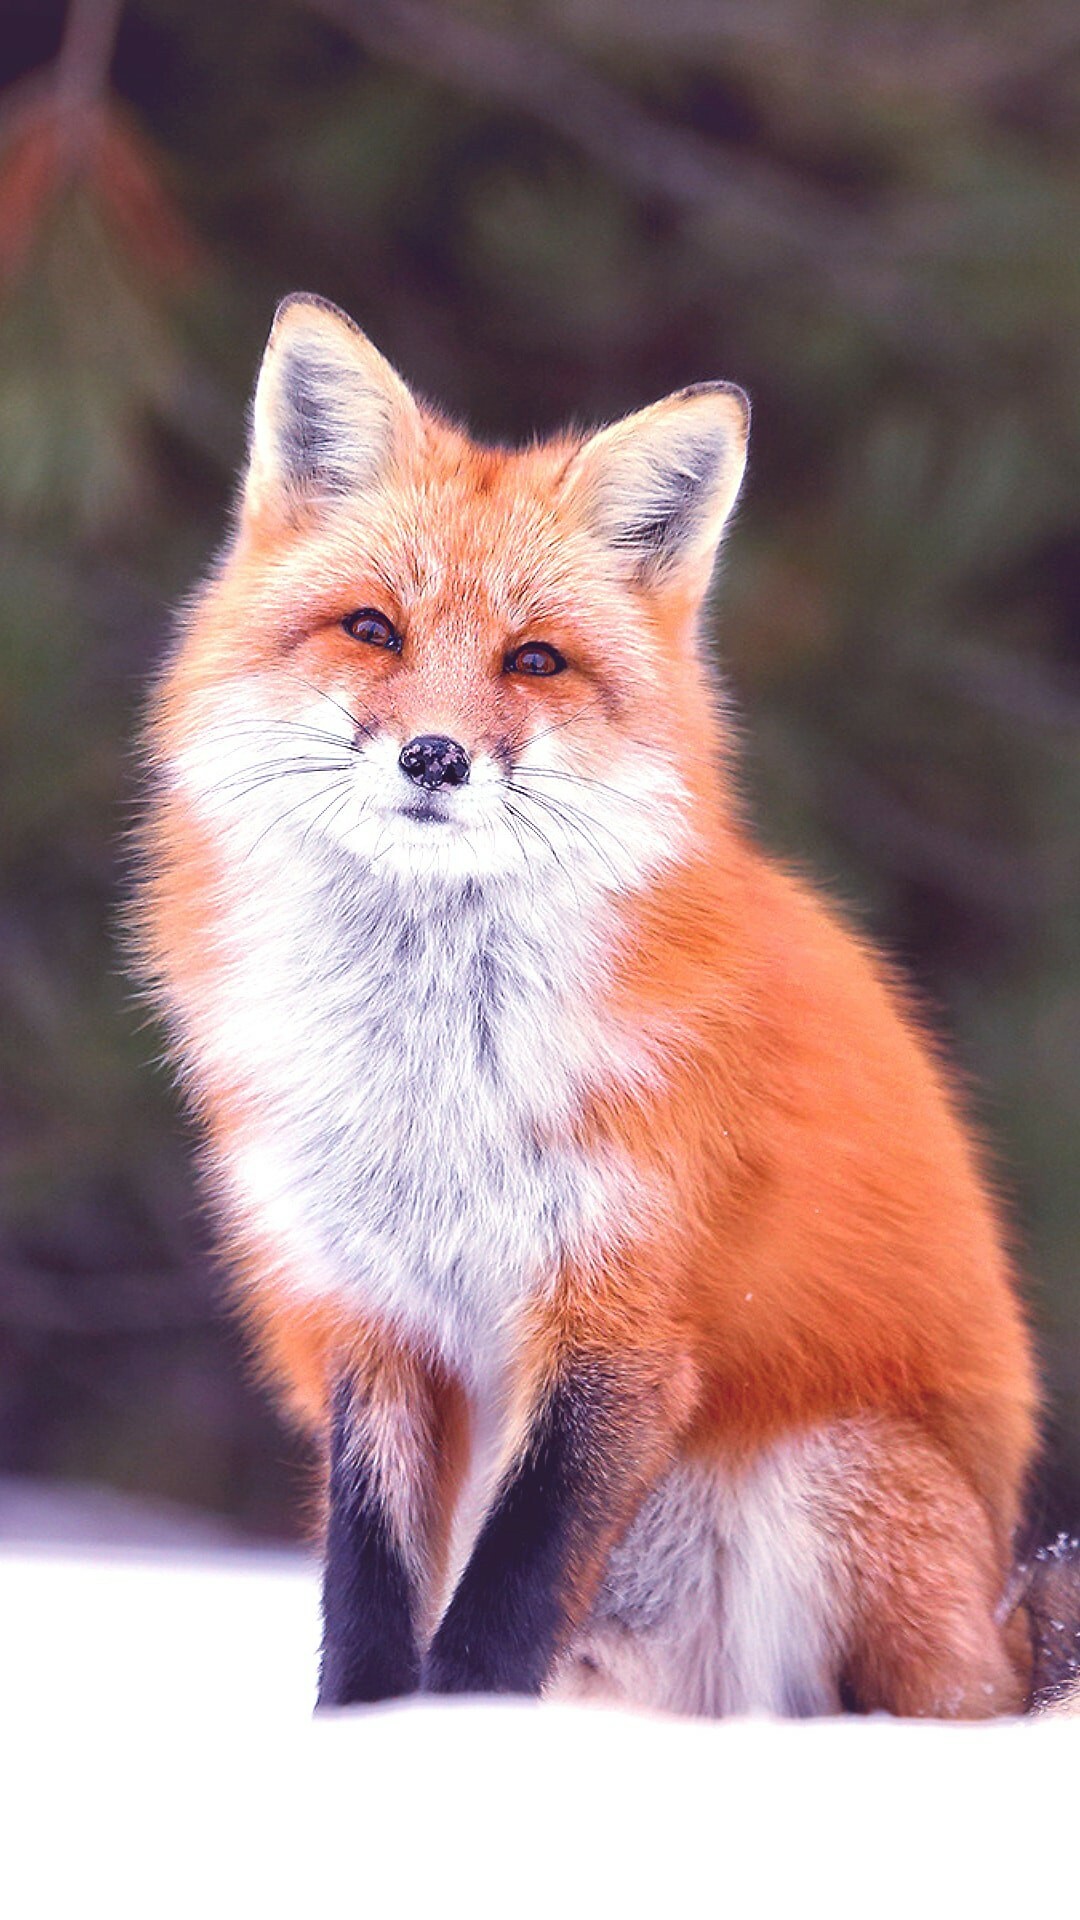 Fox: An animal with a long, bushy tail, a narrow, pointed muzzle, and thick, soft reddish fur. 1080x1920 Full HD Background.